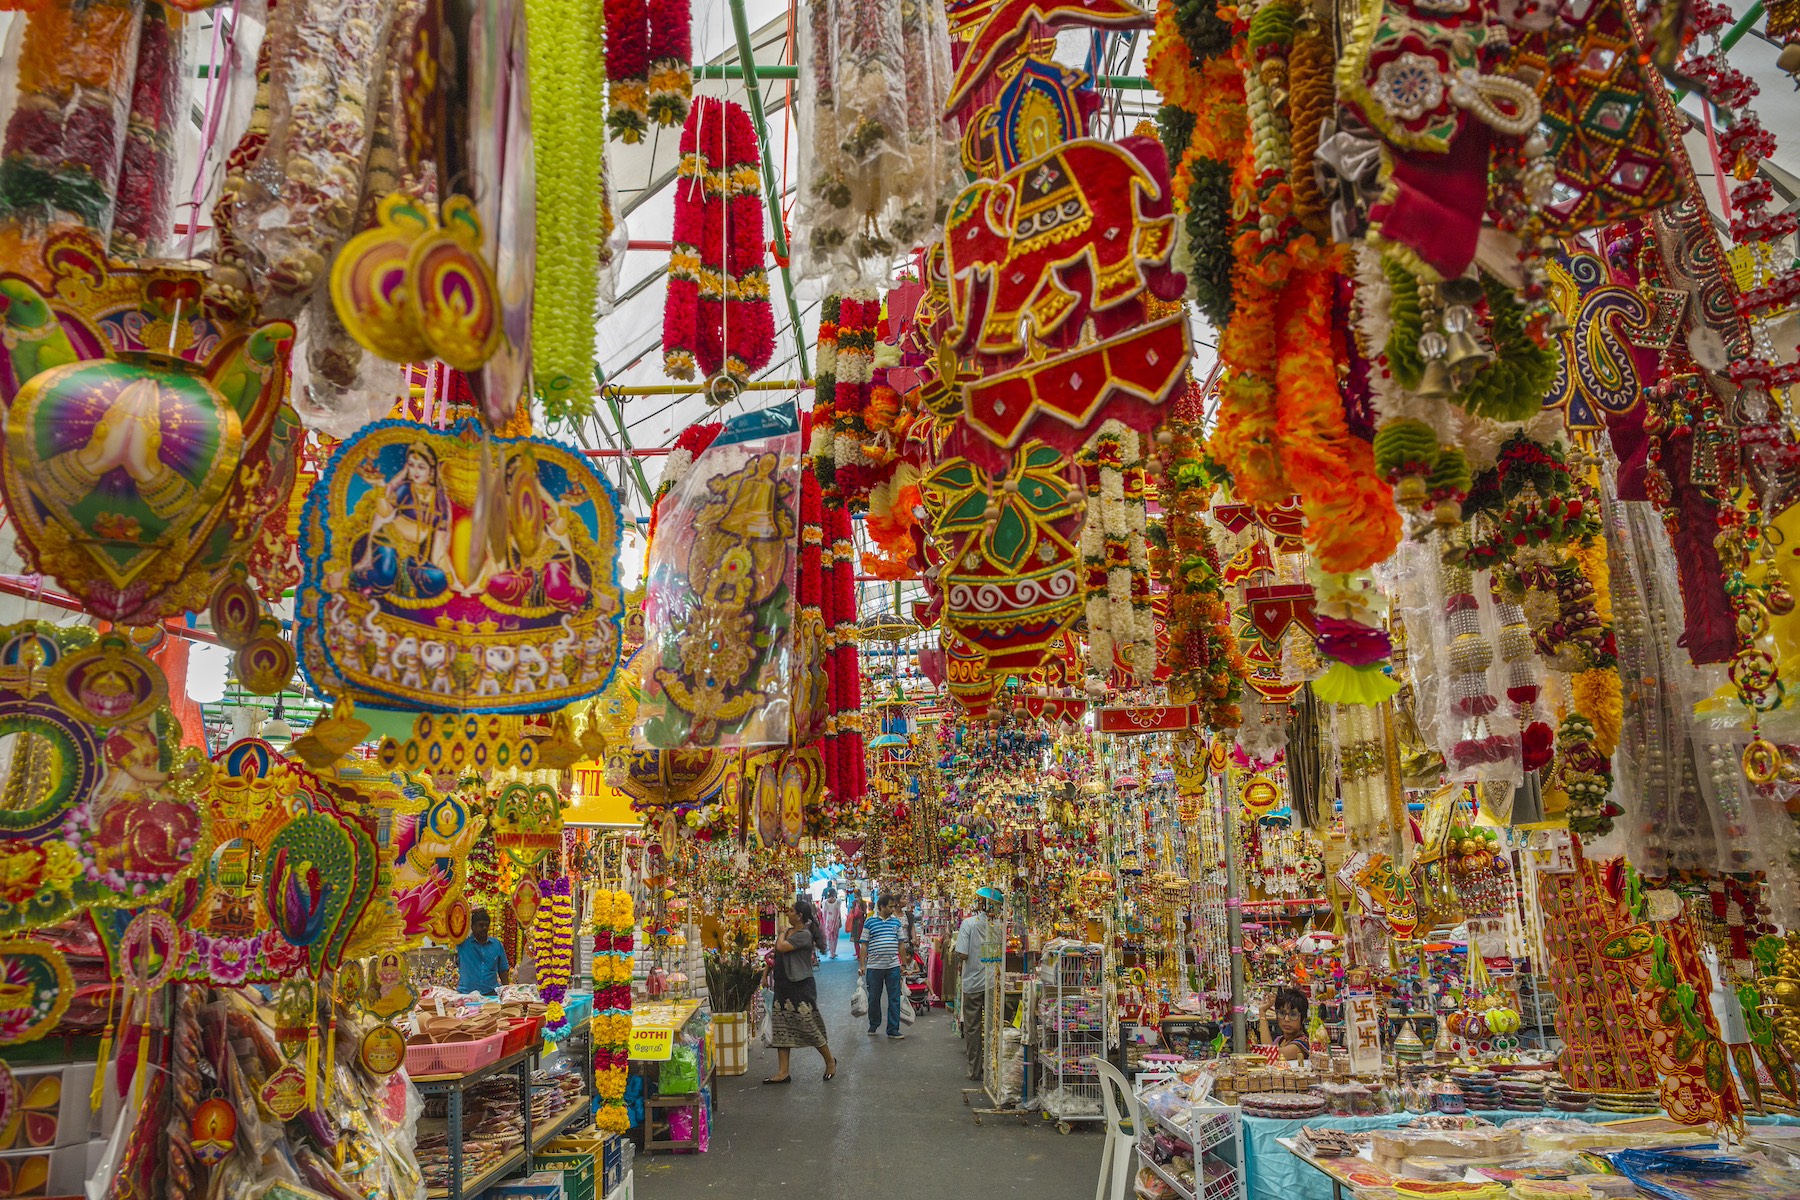 Colorful traditional paper crafts hang from the ceiling at a market in Little India, Singapore